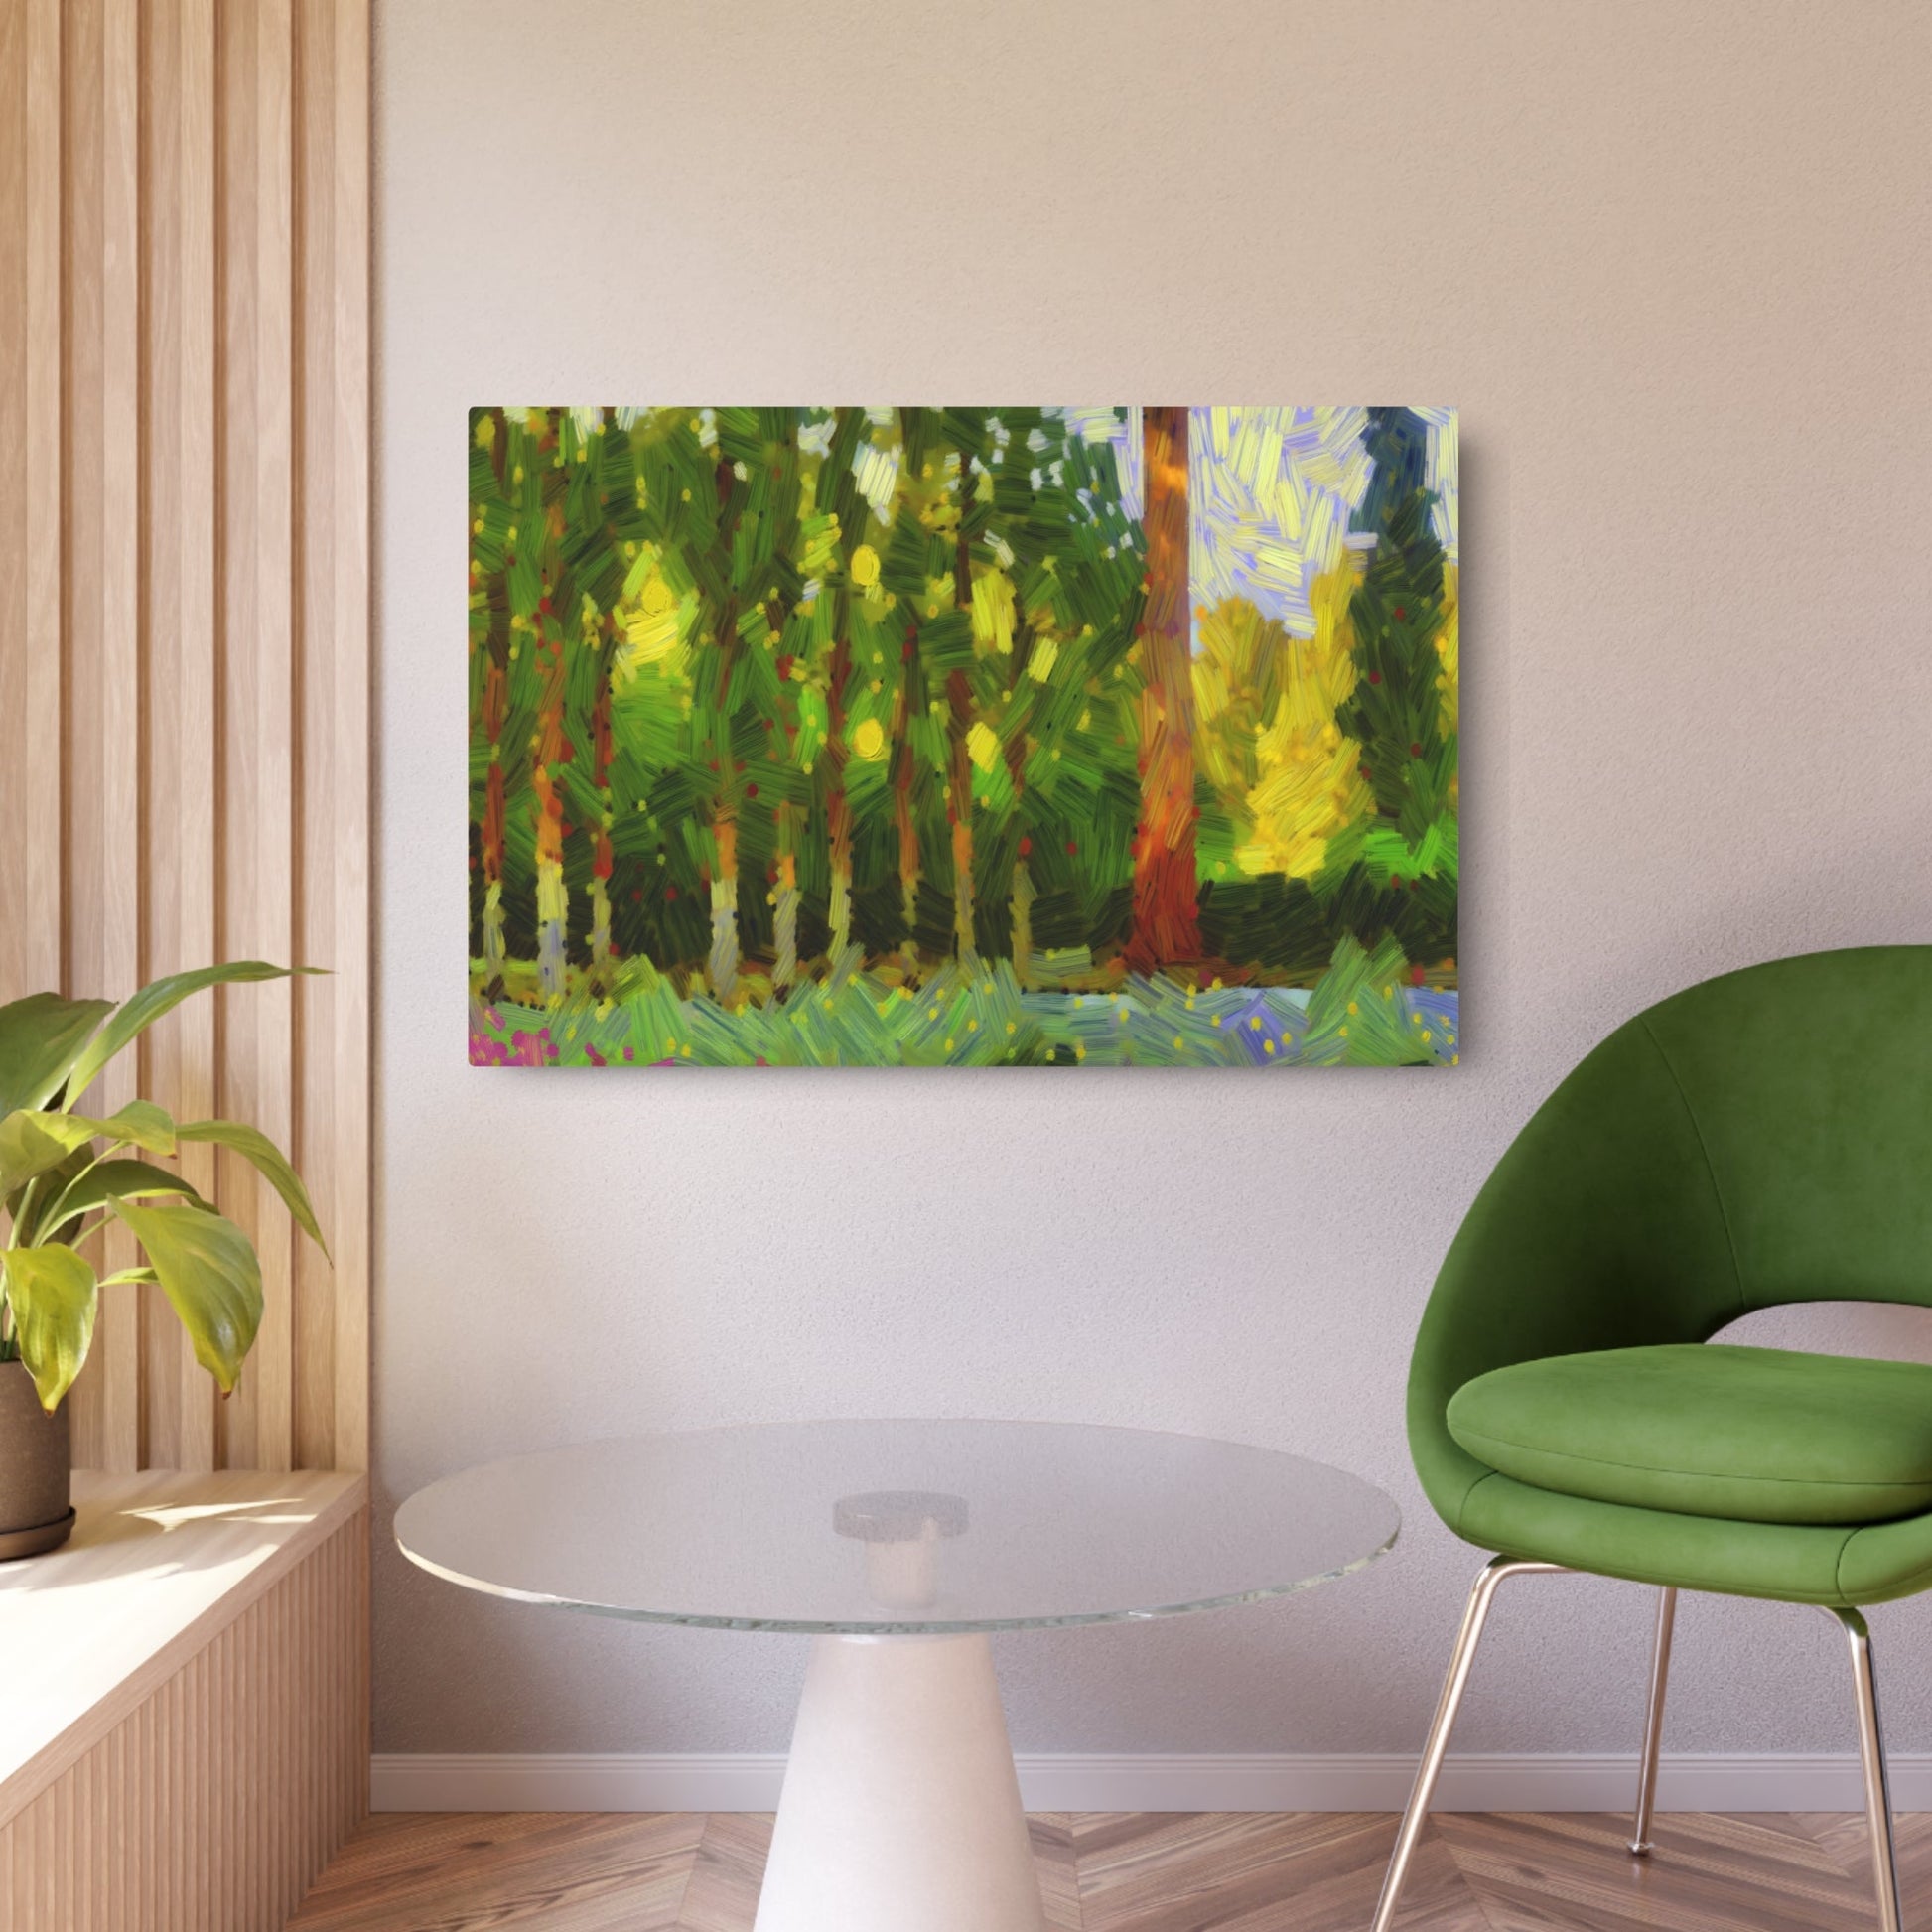 Metal Poster Art | "Impressionist Western Art Style - Vibrant Lush Forest with Towering Trees and Sunlight Filtering Through Leaves Painting" - Metal Poster Art 36″ x 24″ (Horizontal) 0.12''